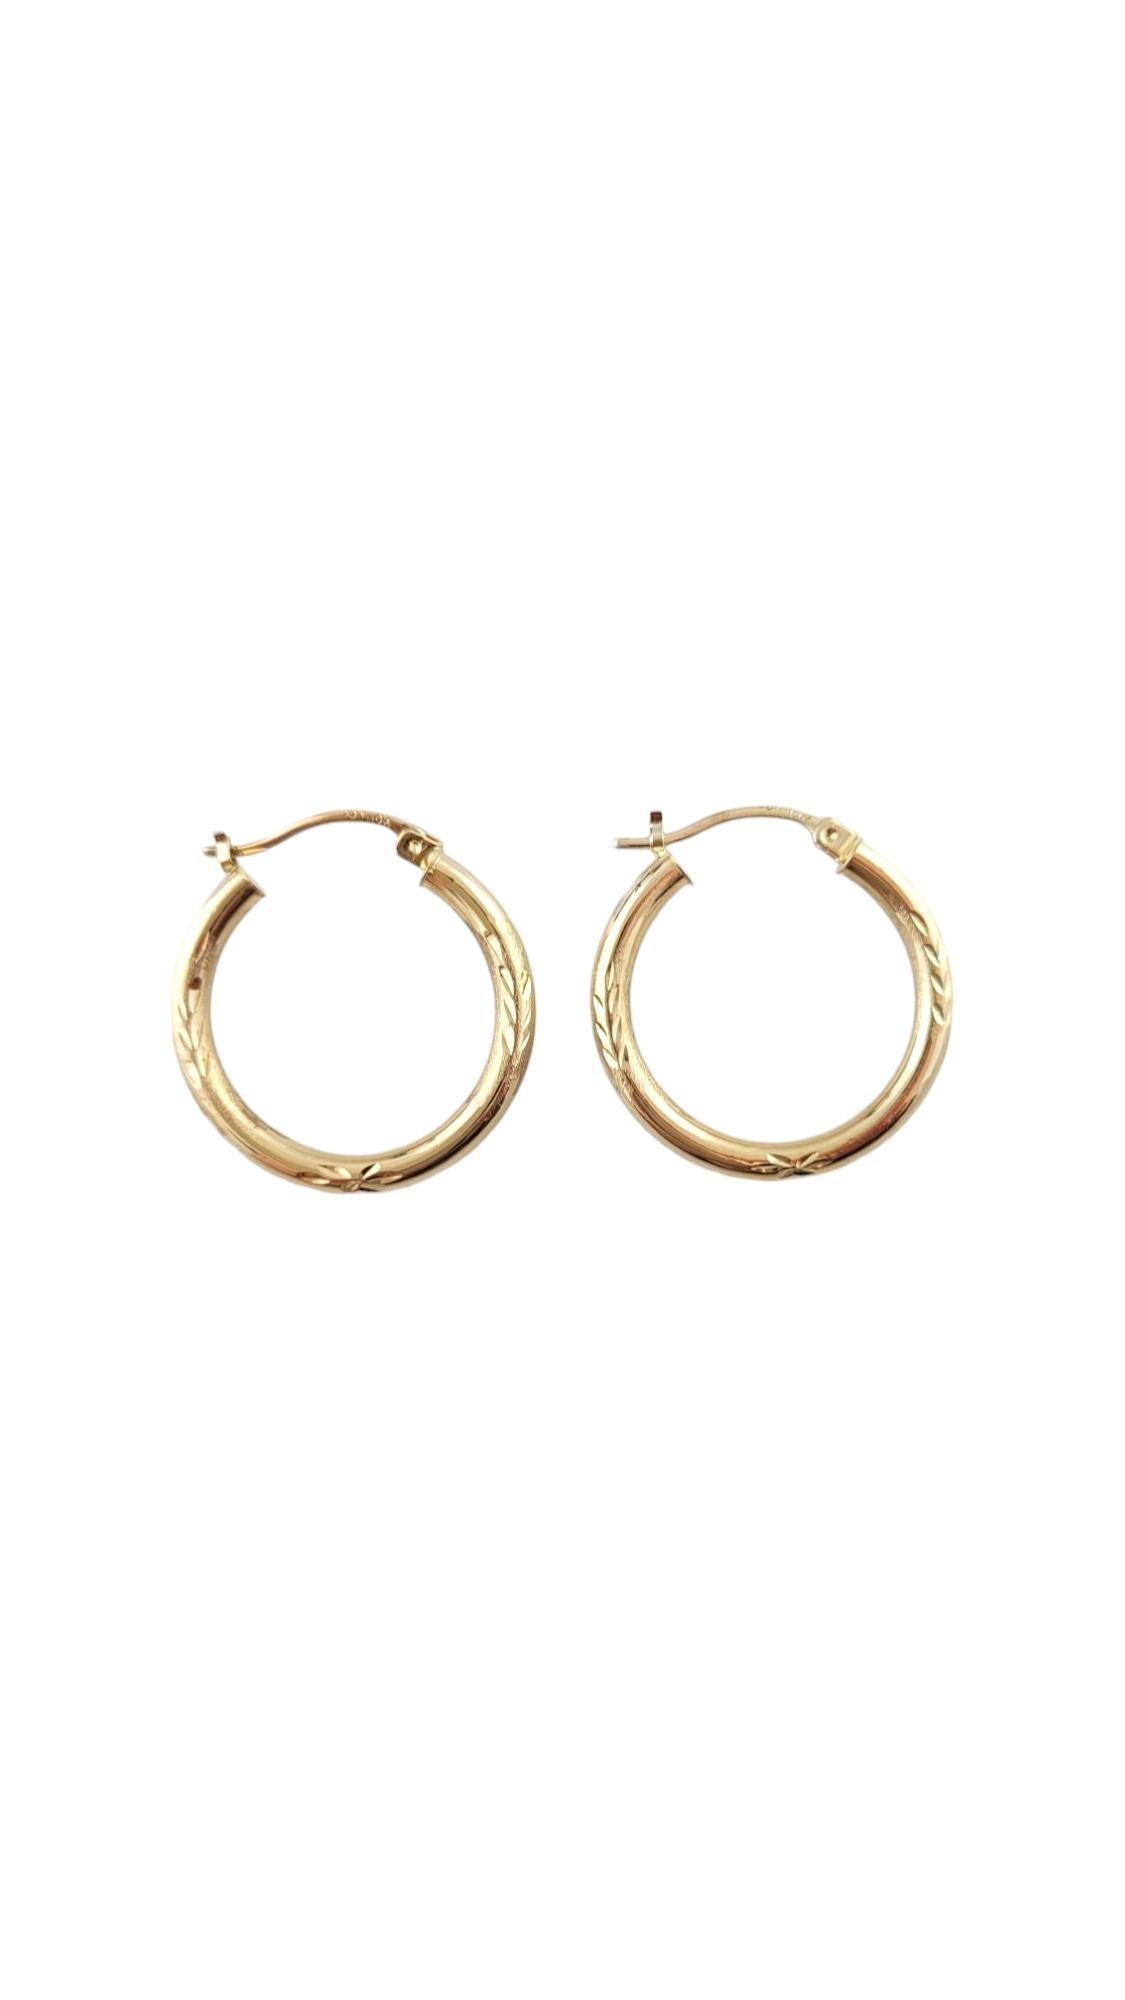 10 Karat Yellow Gold Hoop Earrings-

These classic gold hoops feature unique engravings and are a gorgeous addition to your collection. 

Size: 25.5 mm x 2.9 mm x 2.8 mm. 

Stamped: JL 10K

Weight: 0.9 dwt./ 1.4 gr.

Very good condition,